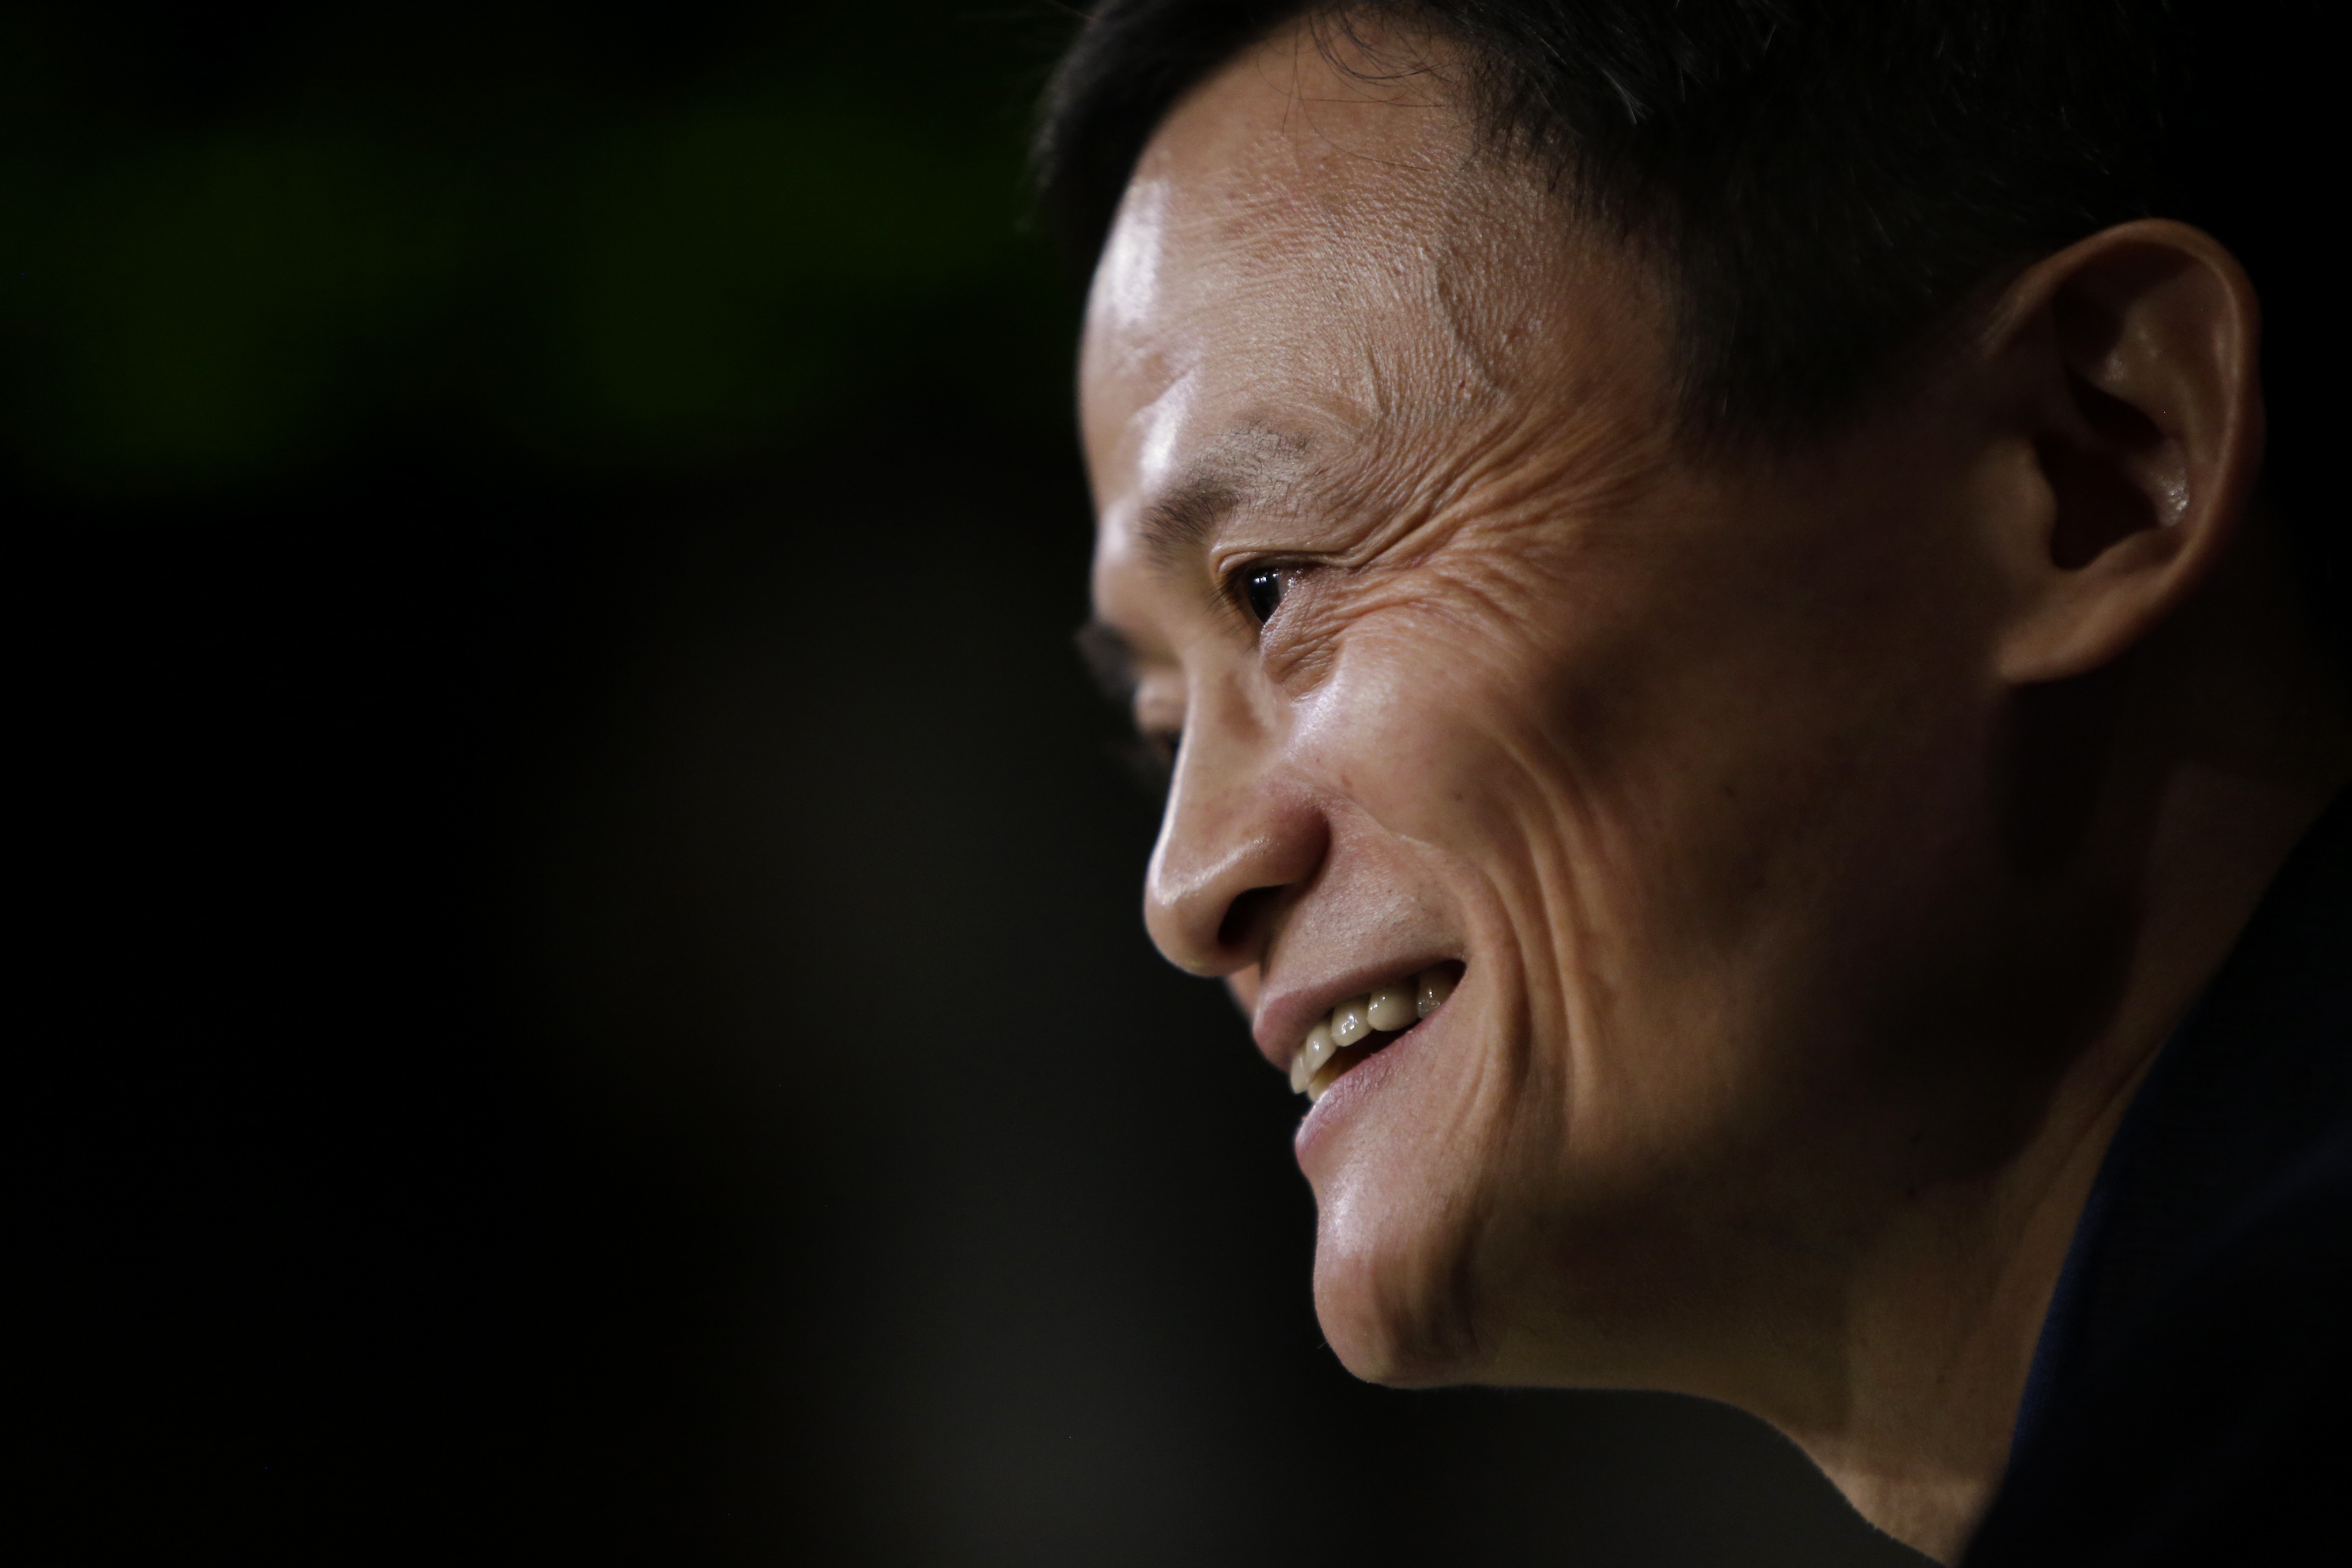 Jack Ma, founder of Chinese Internet giant Alibaba, stepped down as that firm's CEO in 2013. But he's still the company's most public face, and after Alibaba's September IPO, China's single richest man.